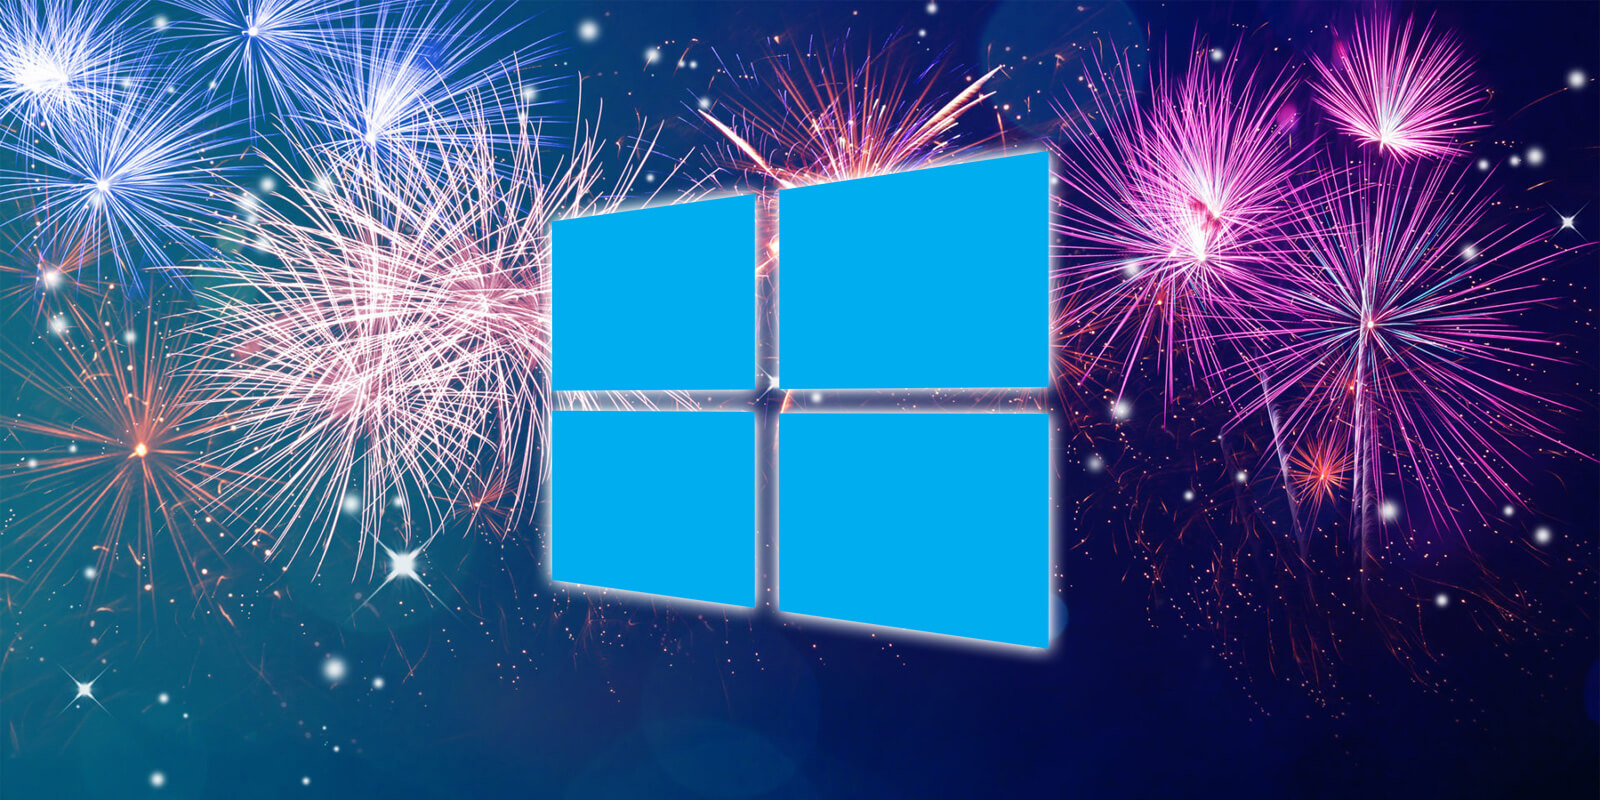 Windows 10 21H1 is released, these are the new features